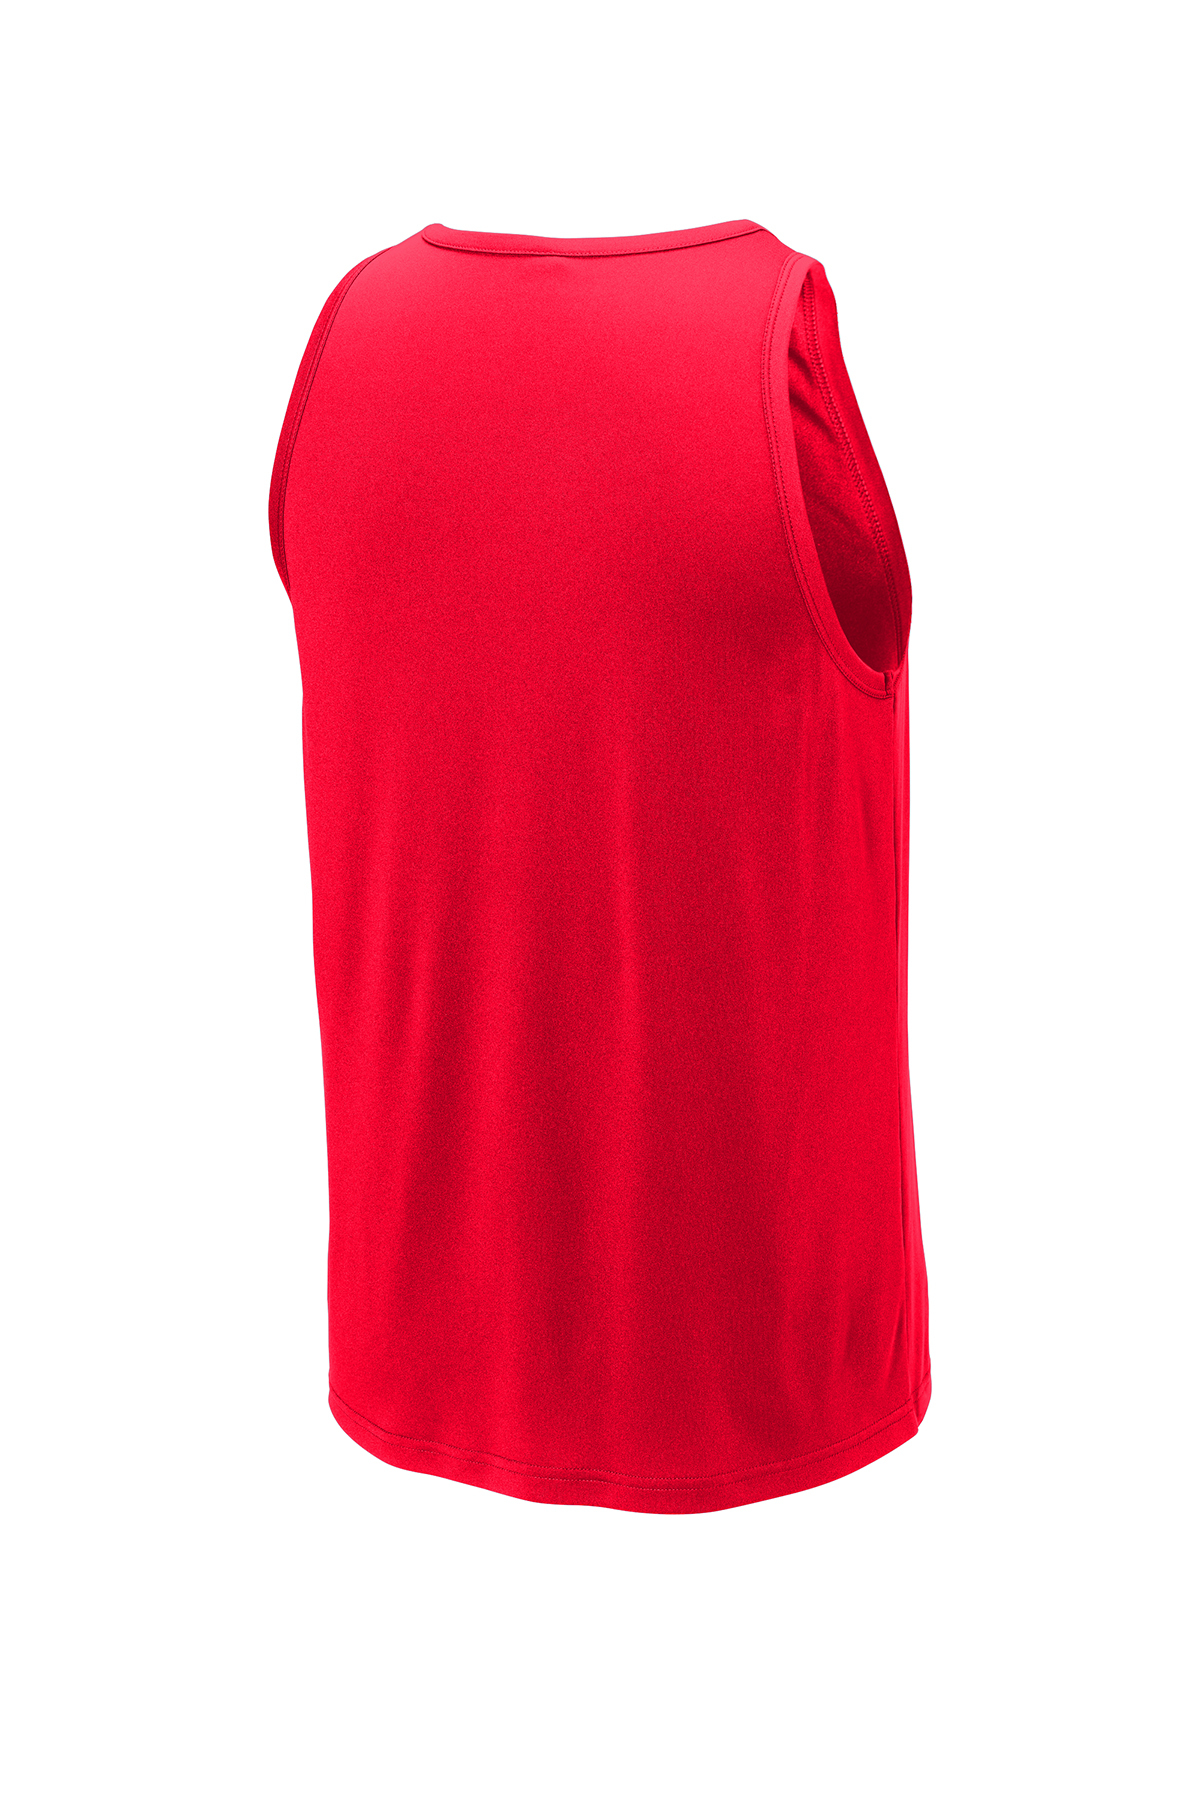 Sport-Tek PosiCharge Competitor Tank | Product | Company Casuals